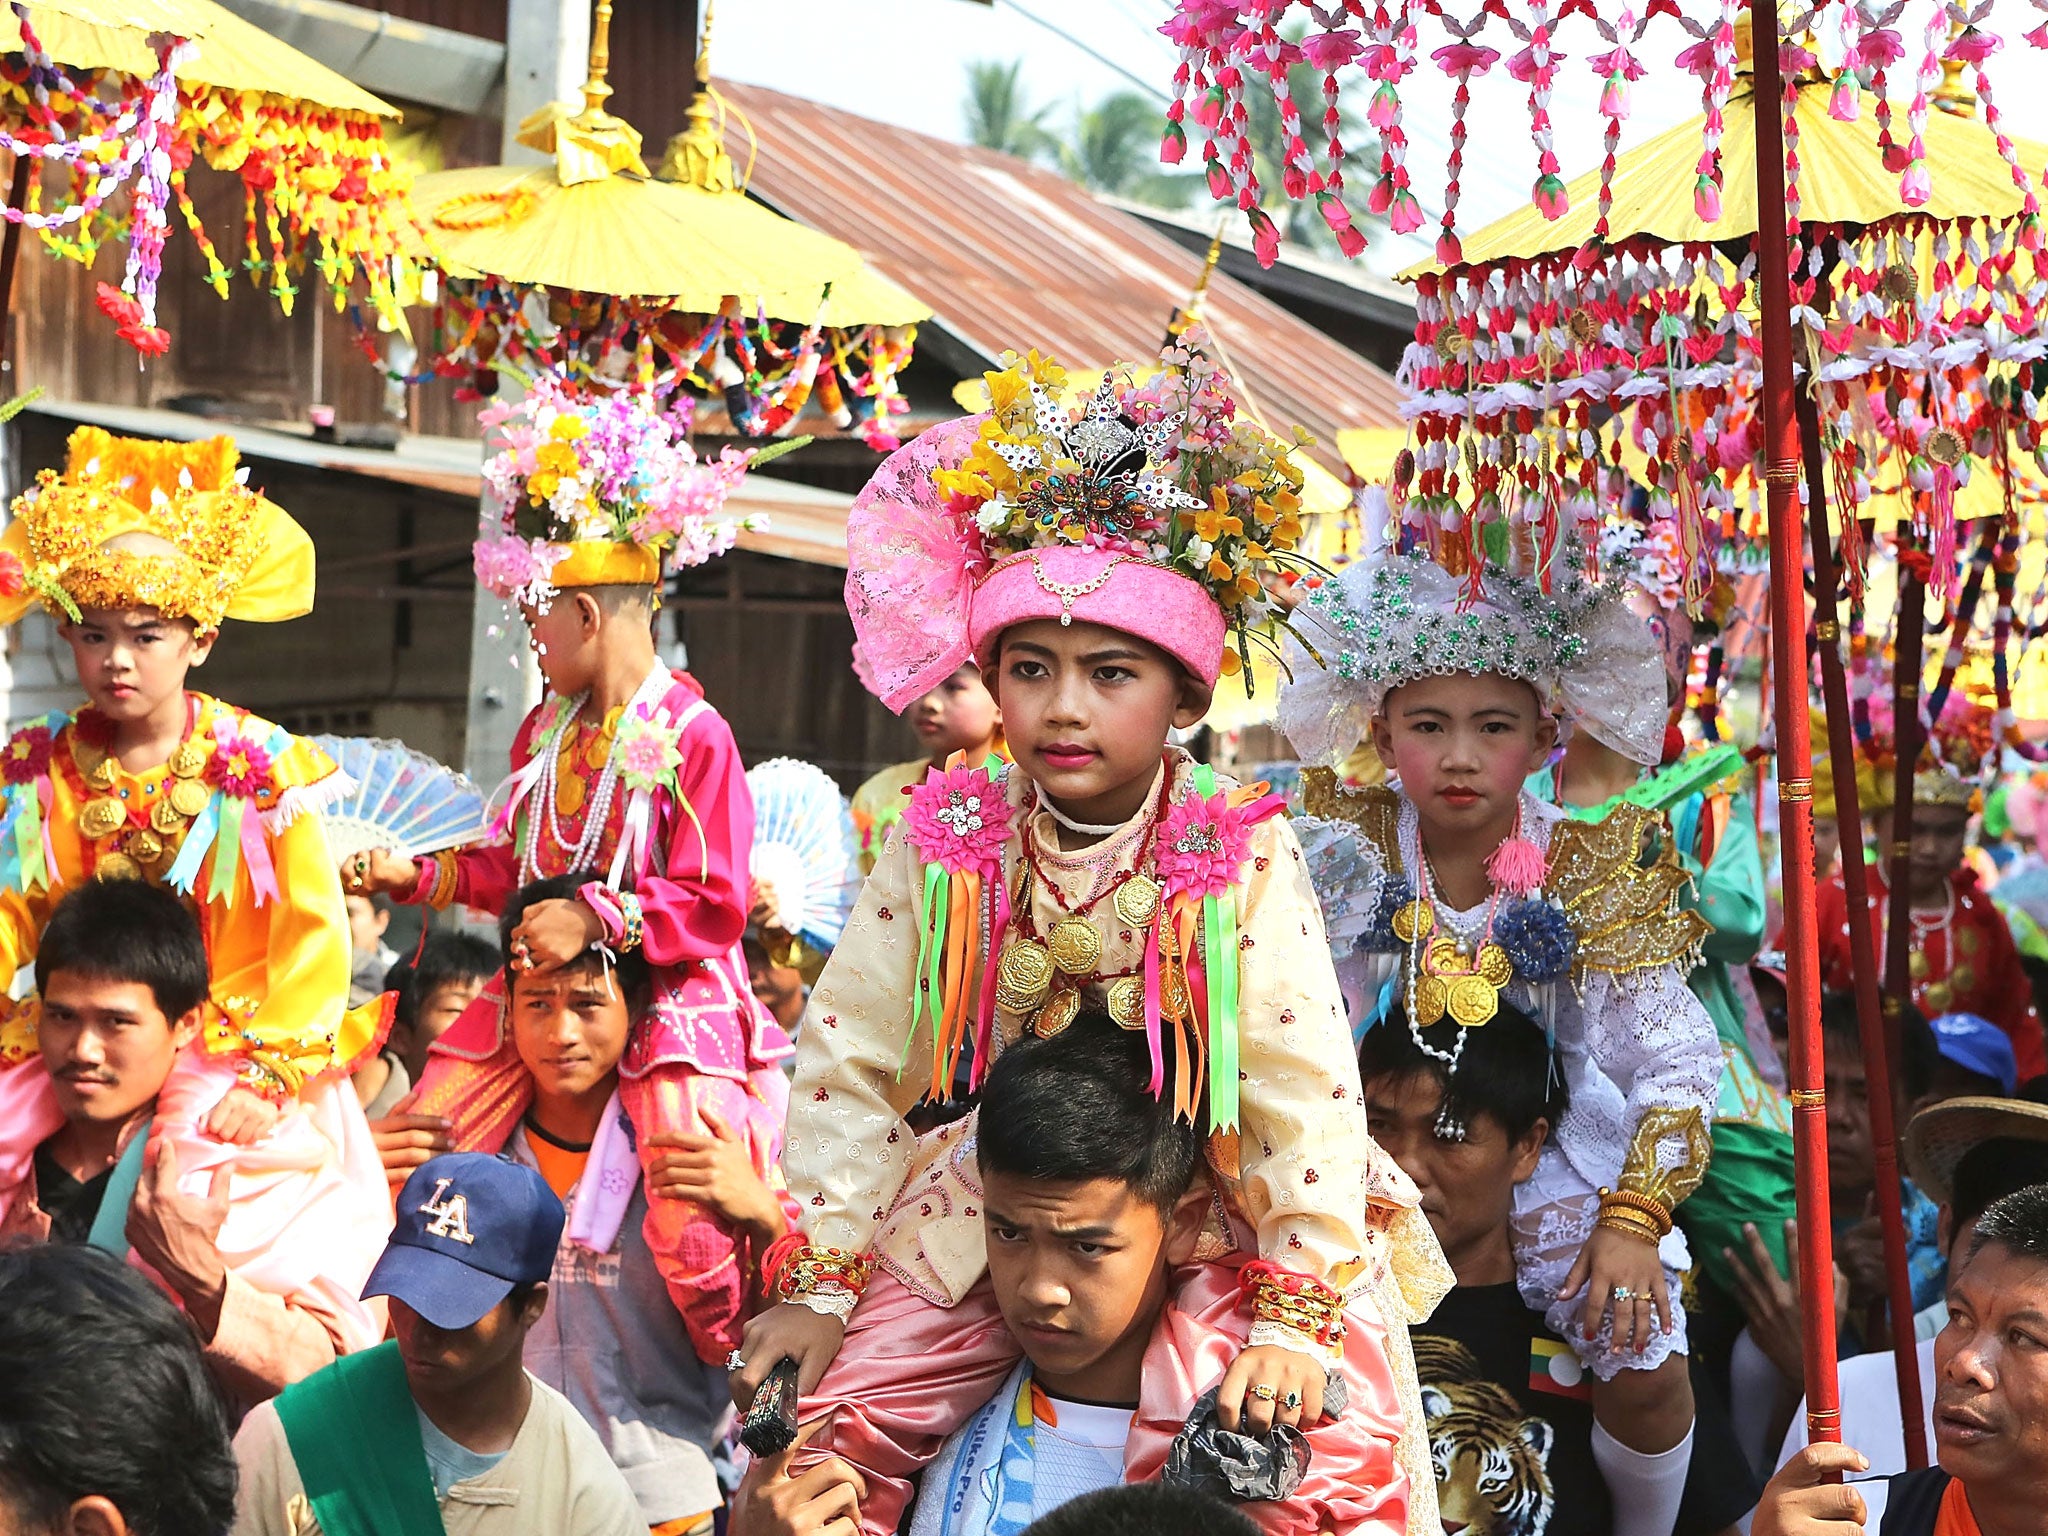 Tai Yai boys are carried in a procession by their relatives during the Poy Sang Long Festival in Mae Hong Son